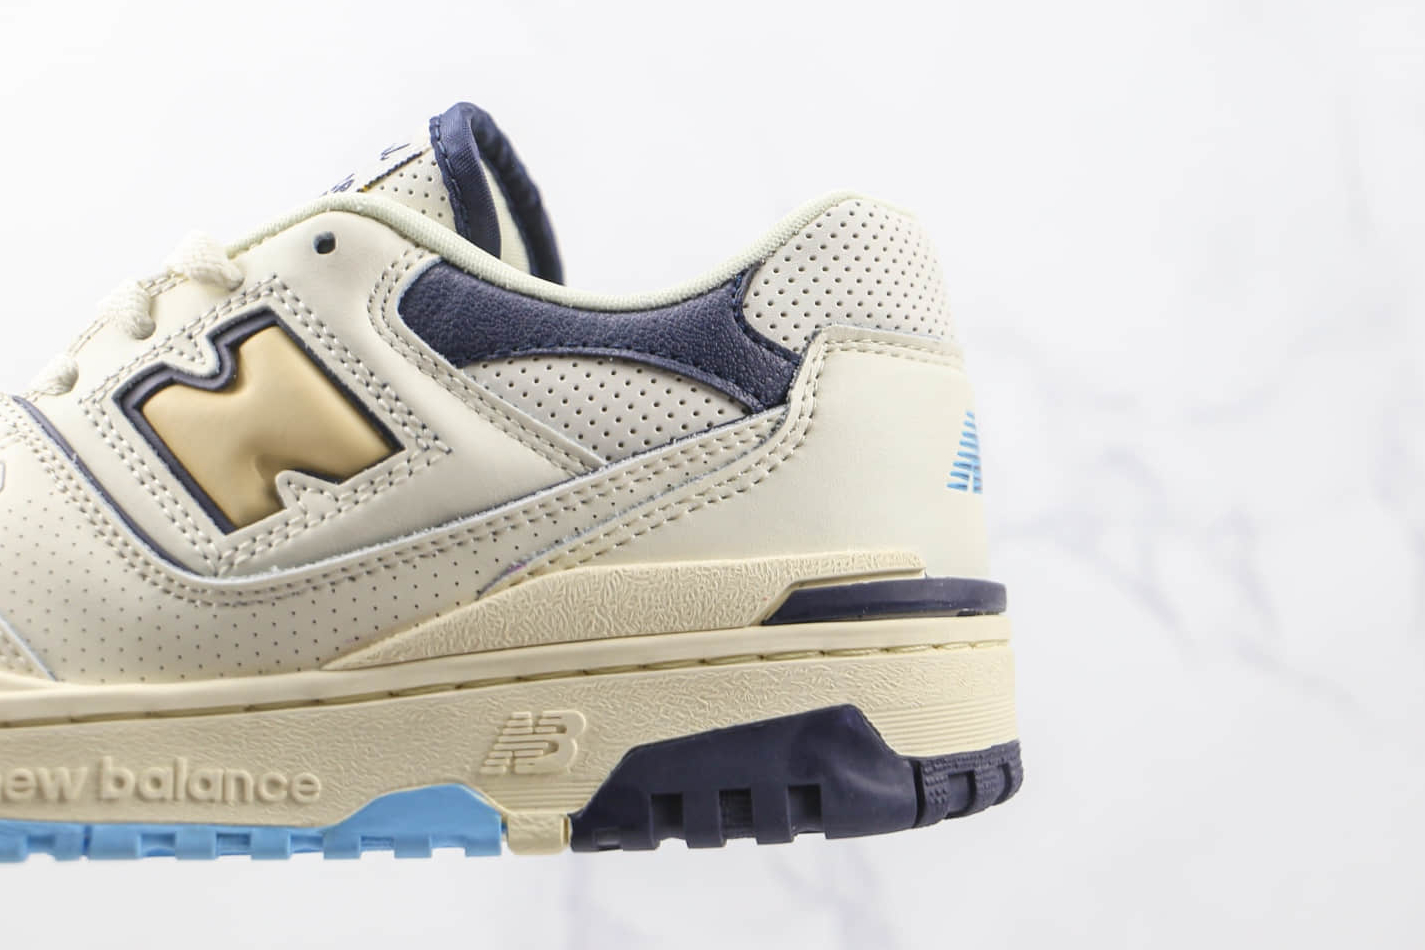 New Balance 550 x Rich Paul: An Iconic Collaboration for Authentic Style